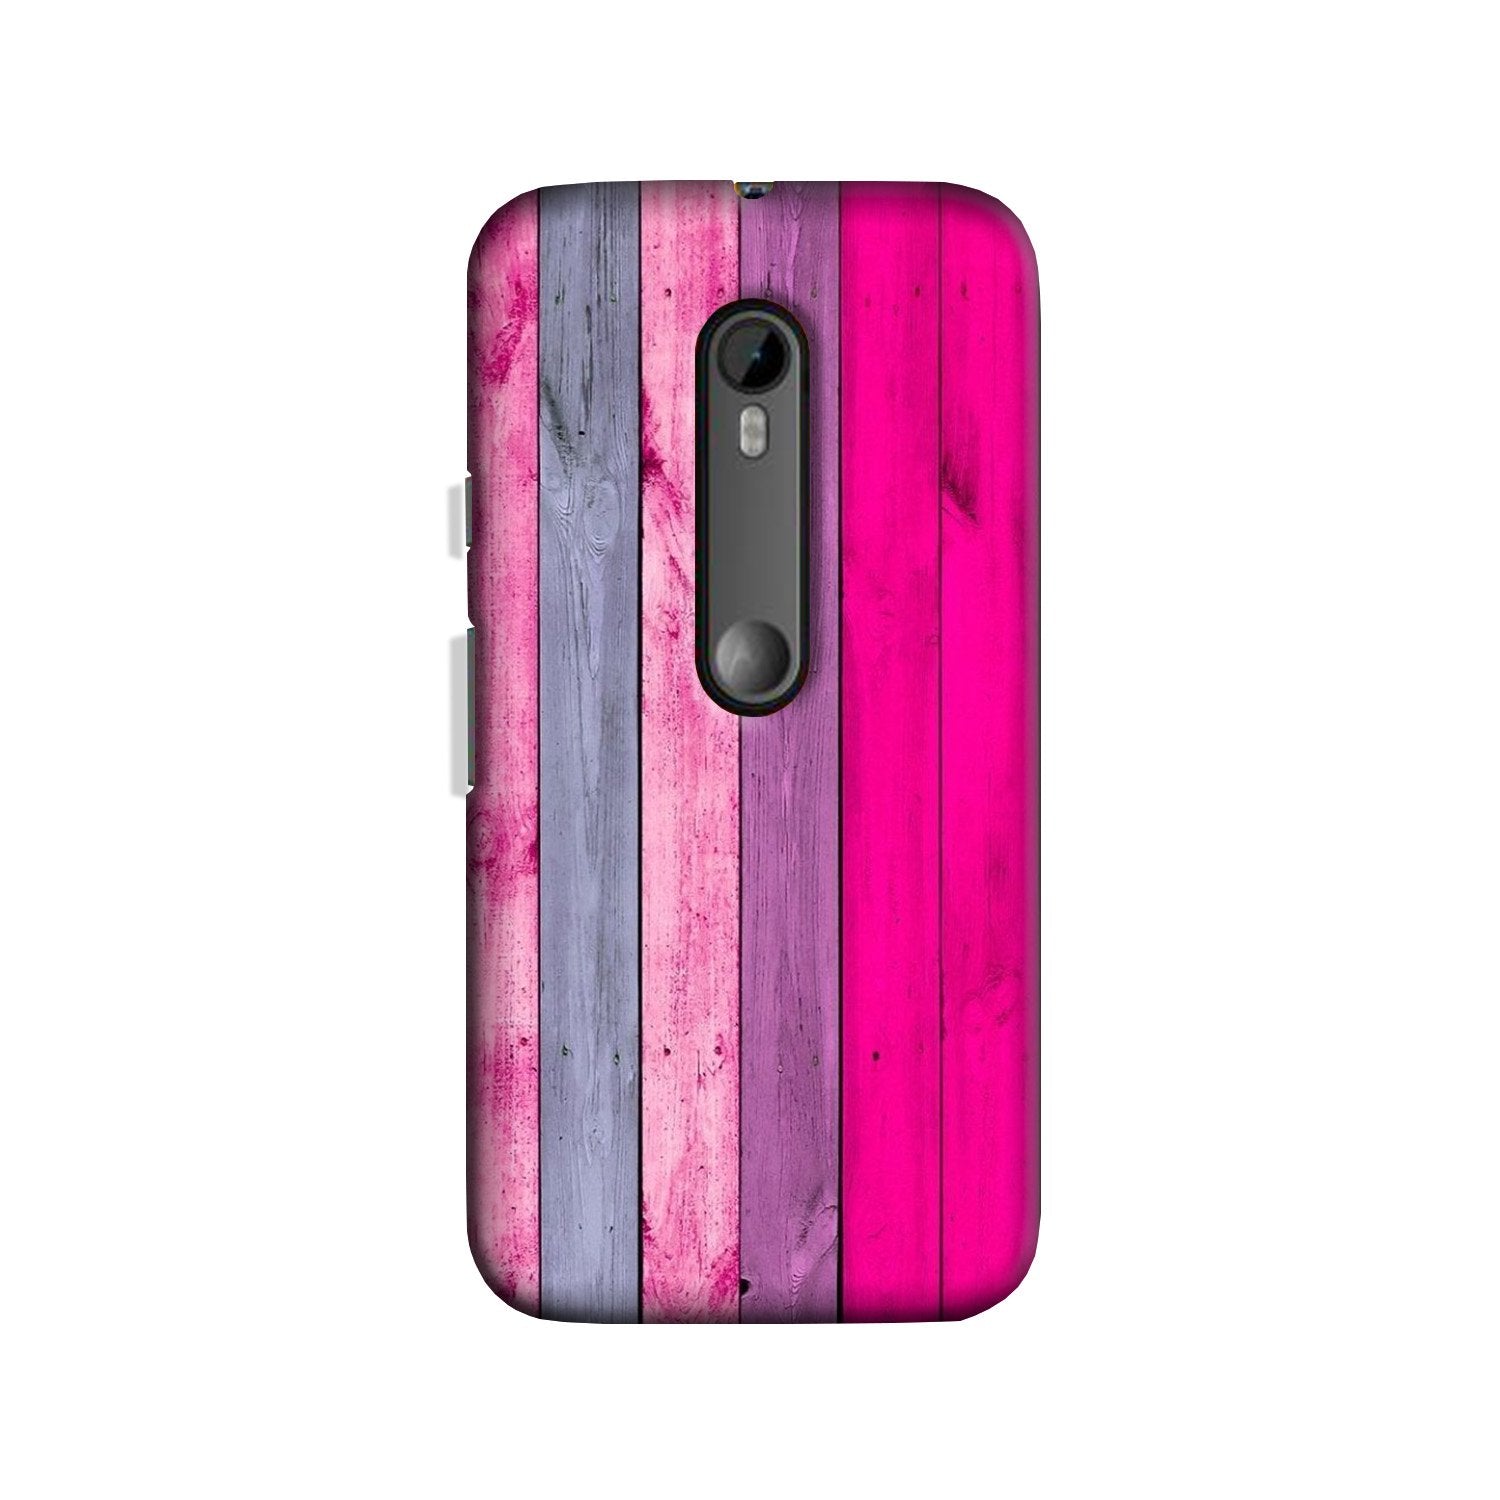 Wooden look Case for Moto G3